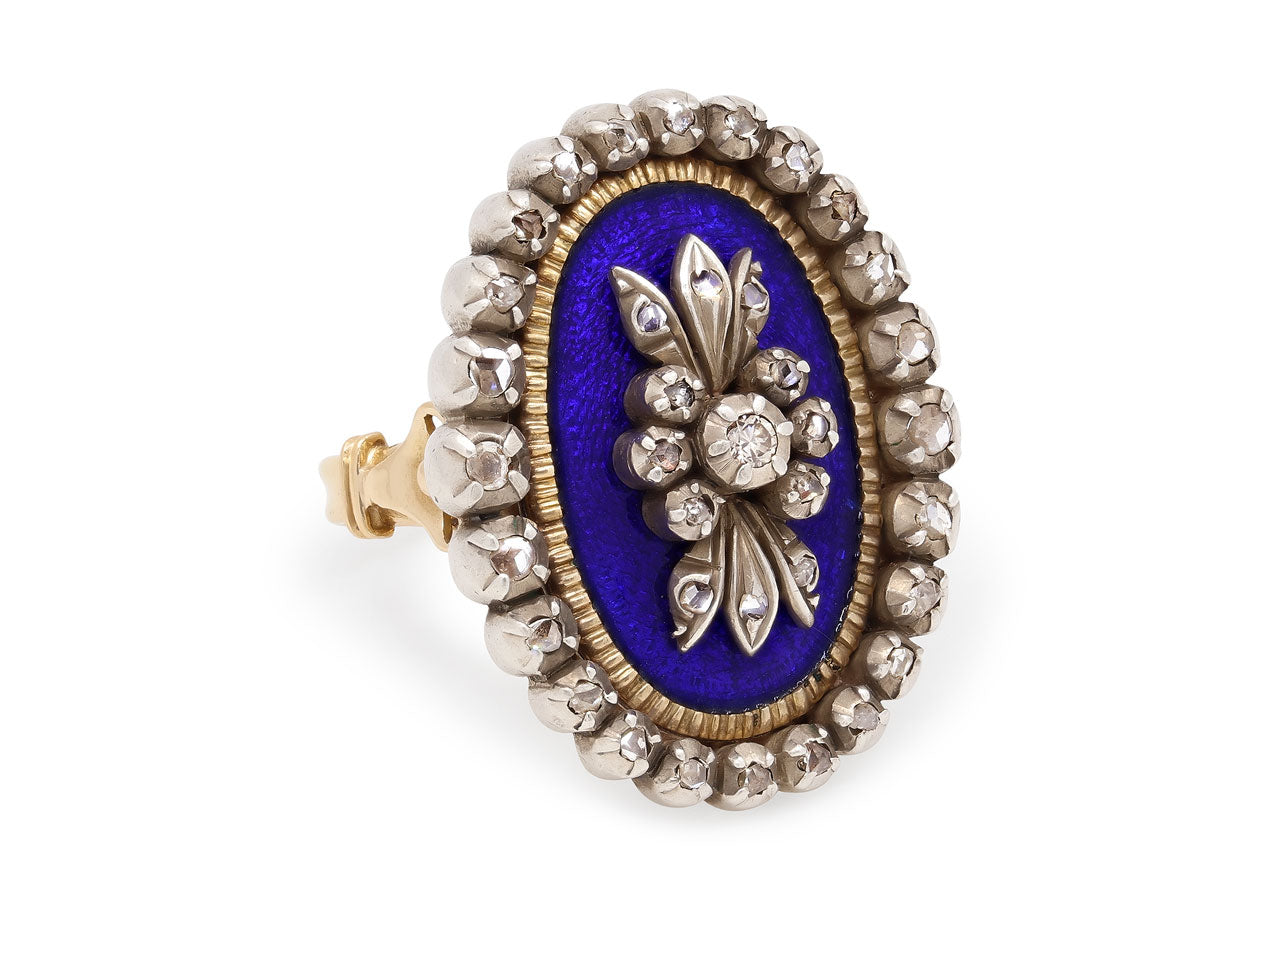 Diamond and Enamel Ring in 18K Gold and Silver